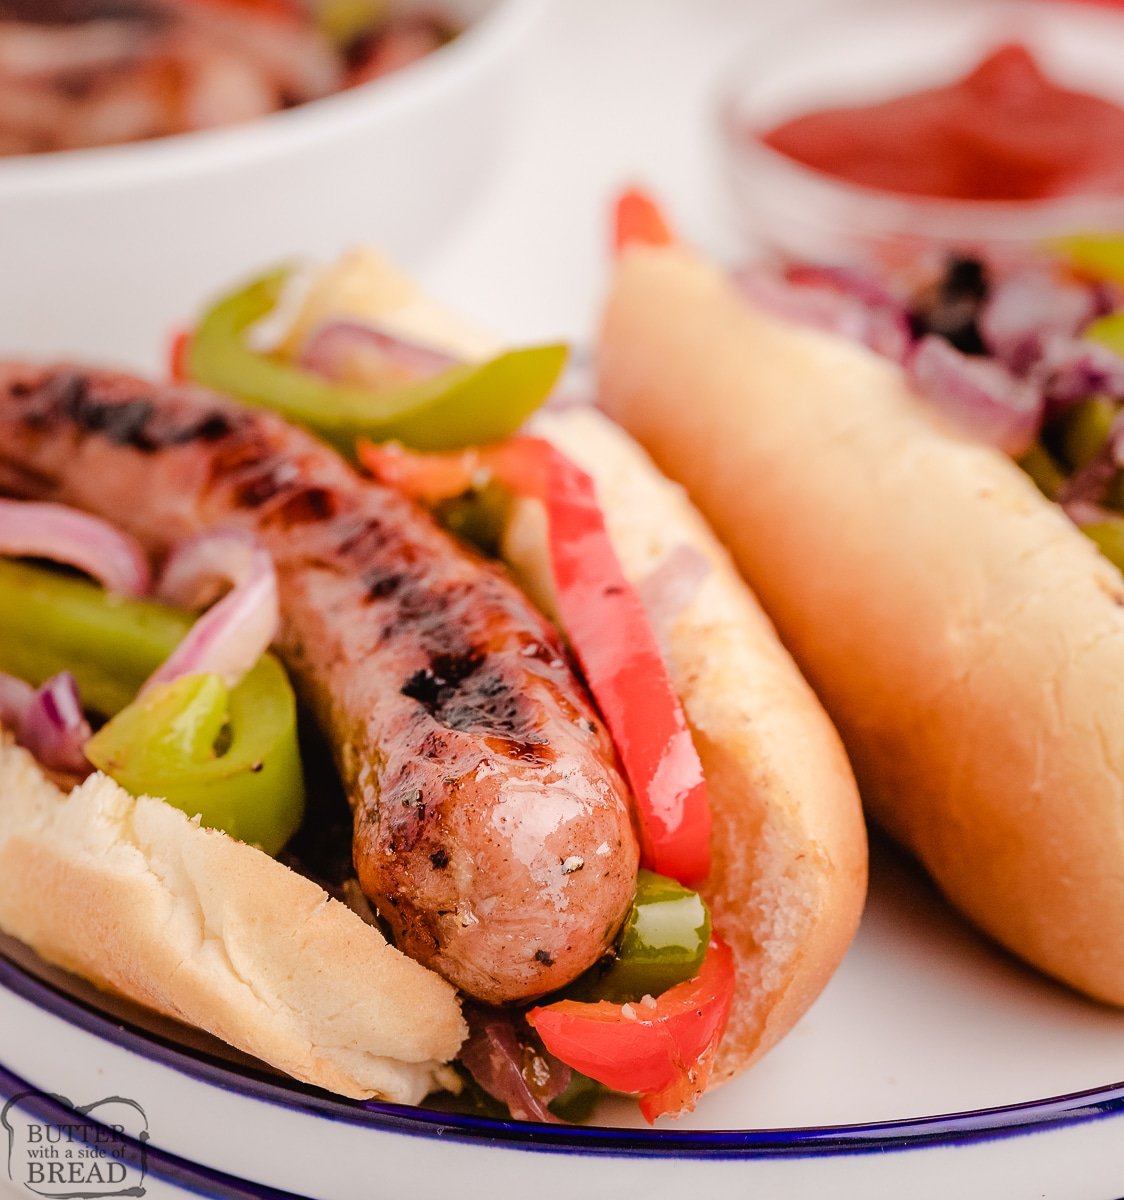 grilled sausages with peppers on a bun